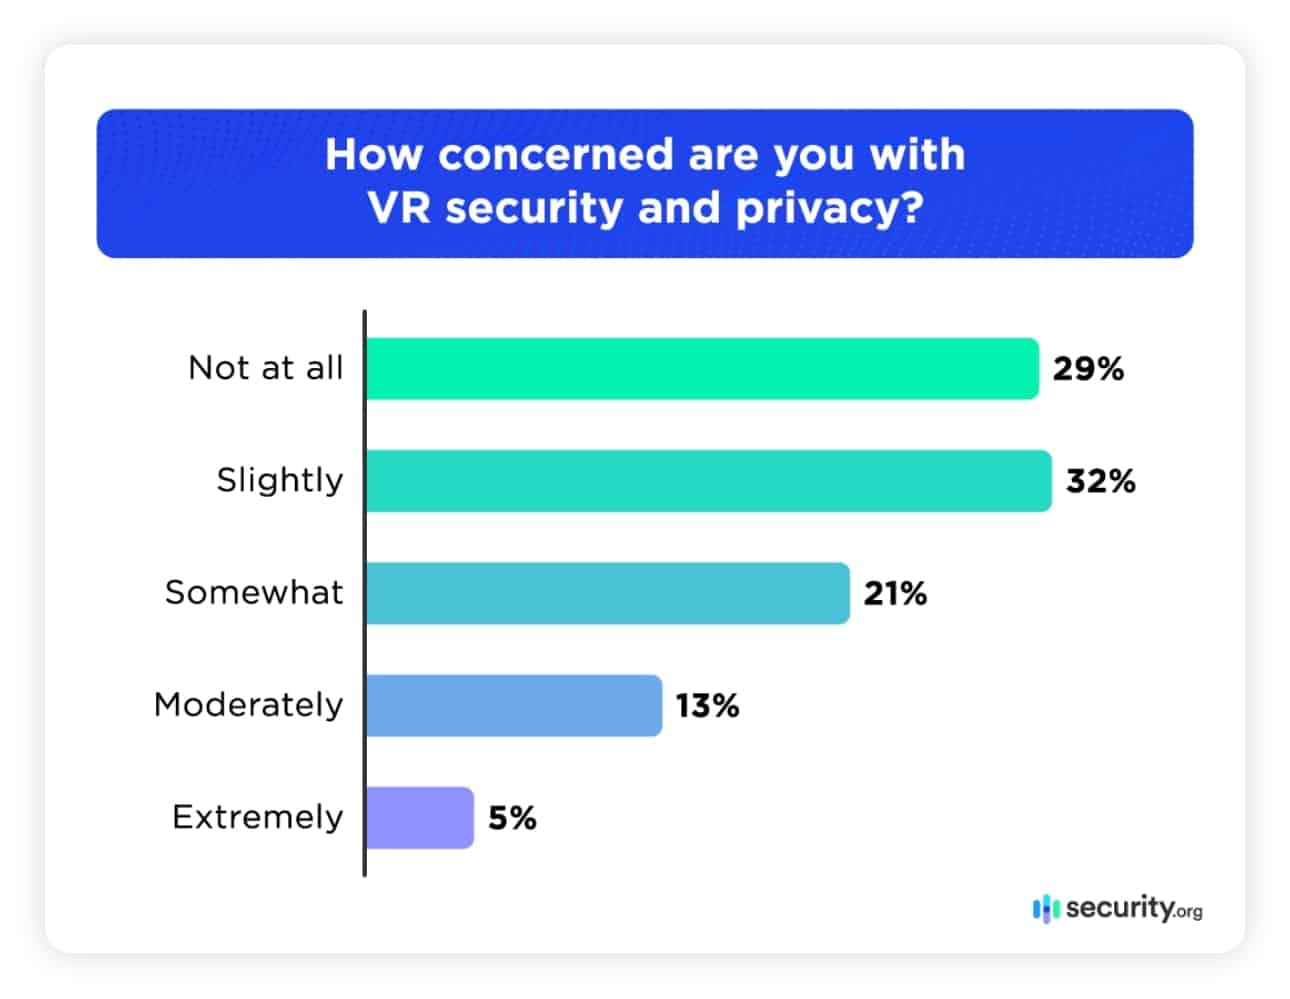 How concerned are you with VR security and privacy?